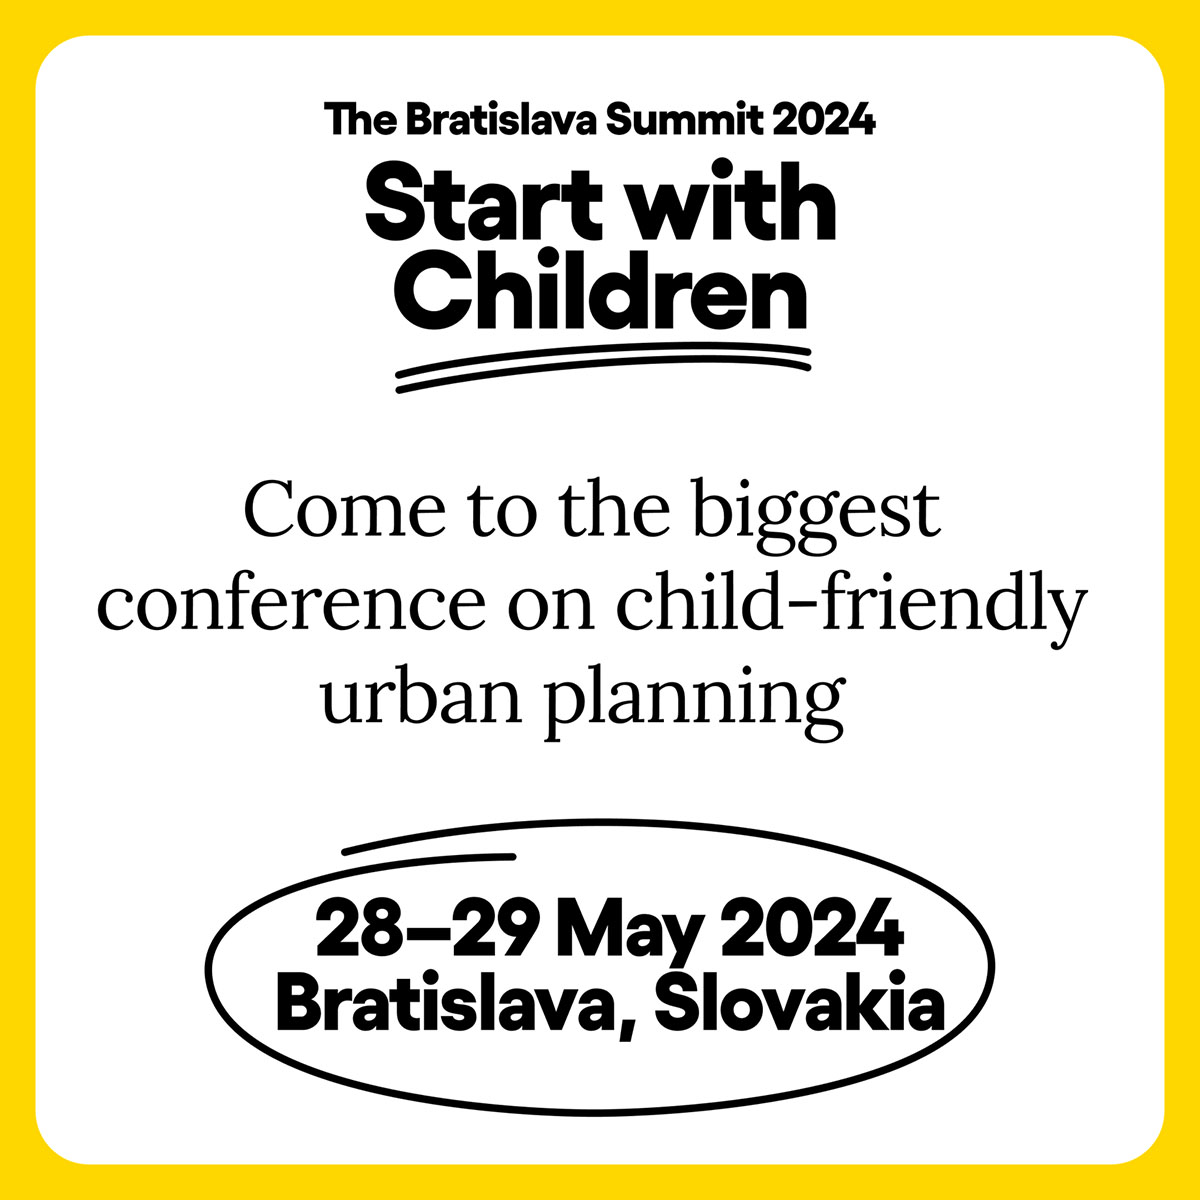 The Bratislava Summit 2024: Start With Children will be held between 28-29 May in Slovakia